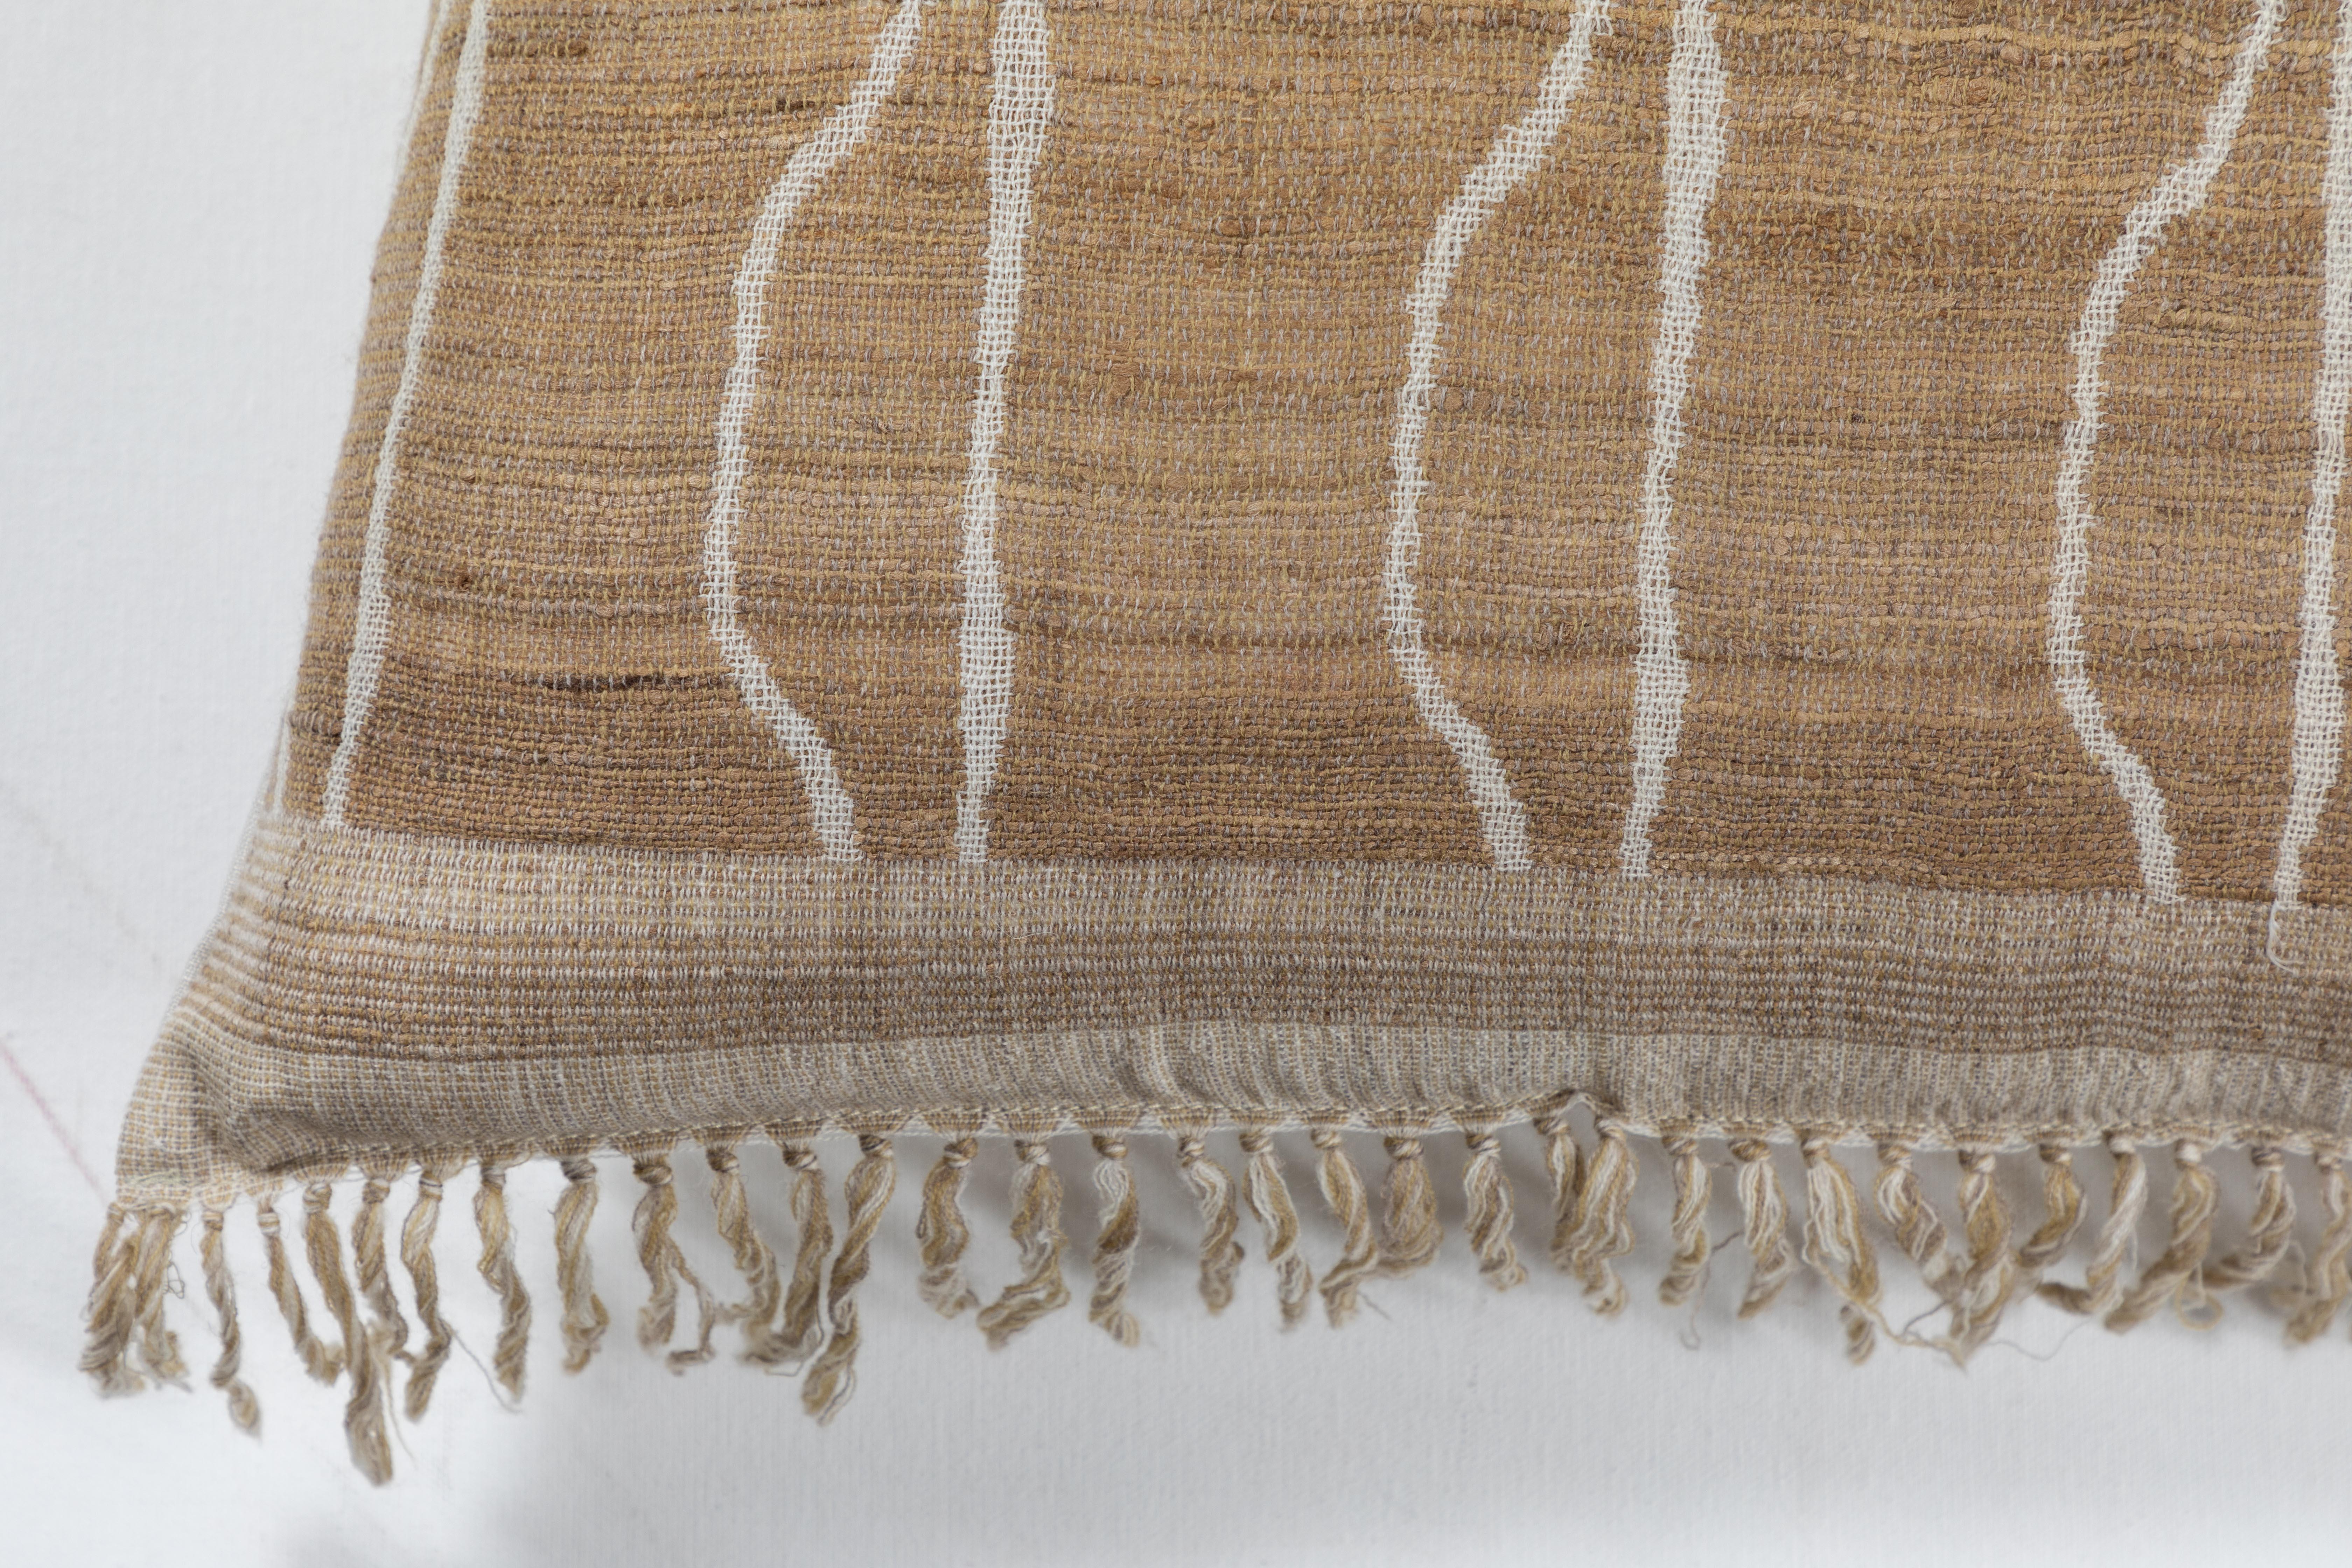 A contemporary line of cushions, pillows, throws, bedcovers, bedspreads and yardage hand woven in India on antique Jacquard looms. Hand spun wool, cotton, linen, and raw silk give the textiles an appealing uneven quality. Sizes vary slightly.
